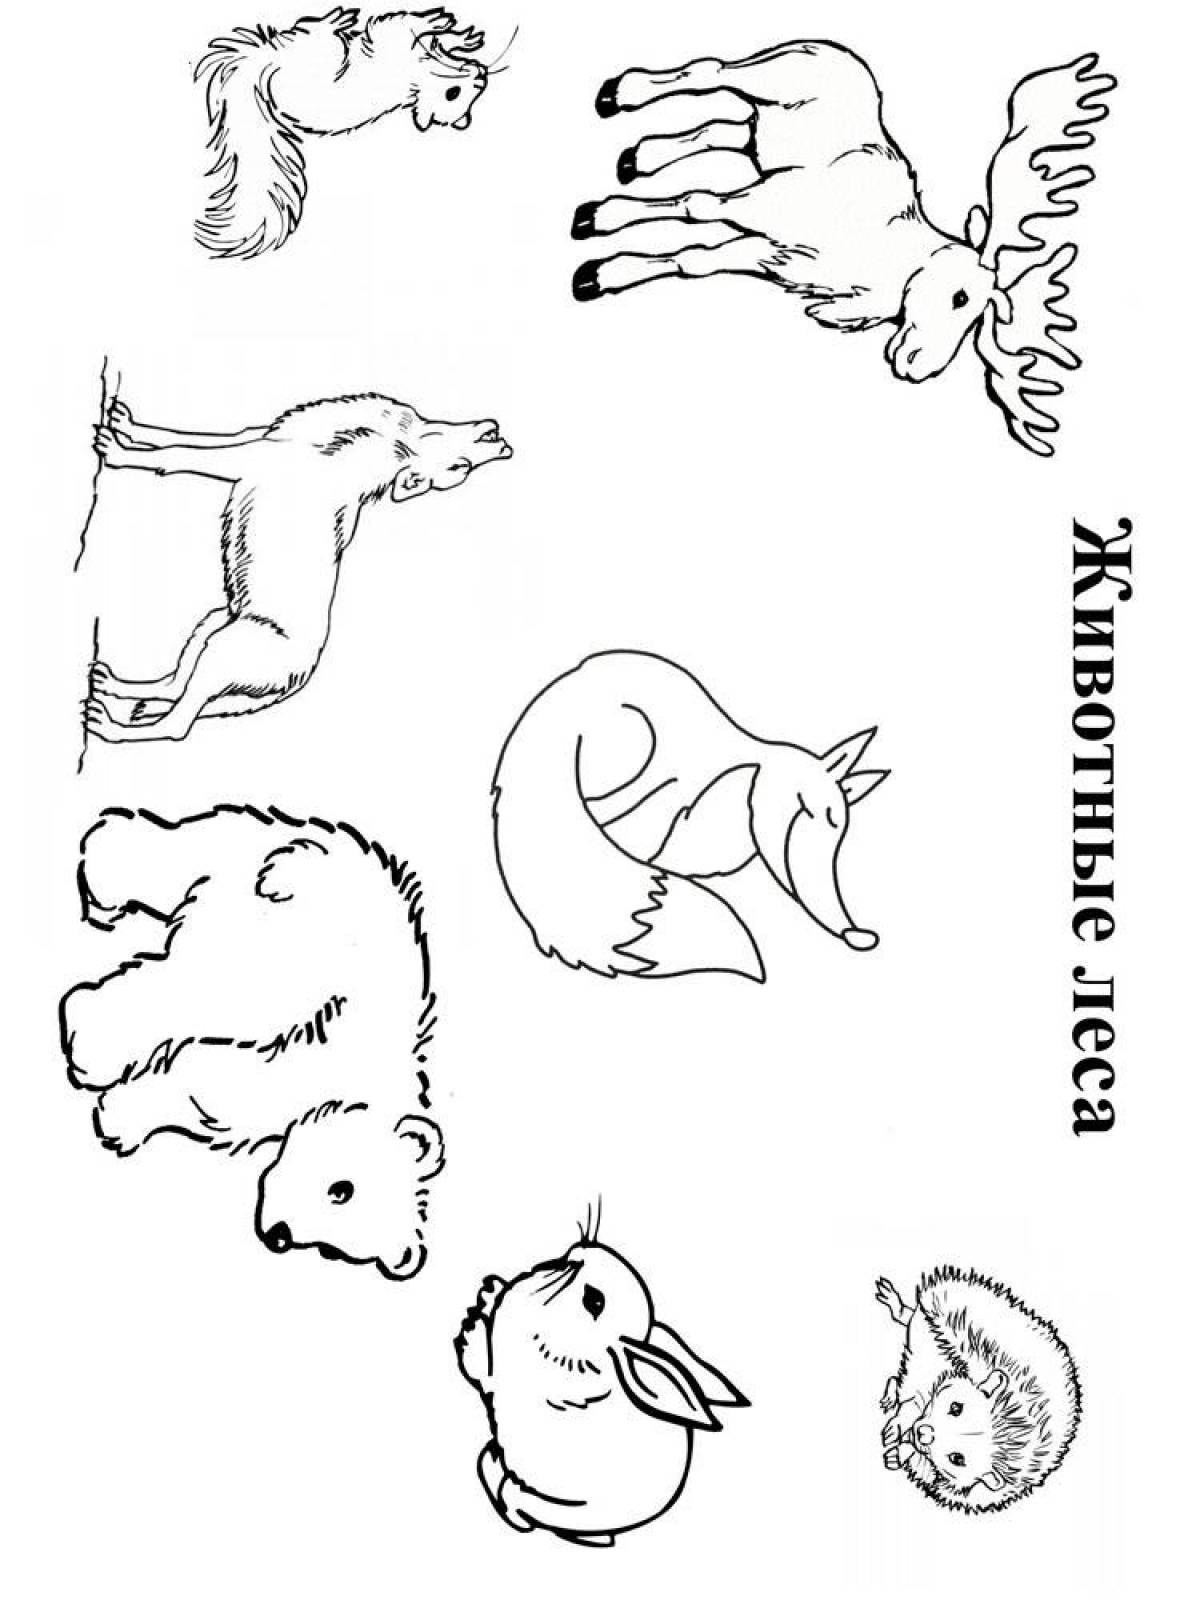 Fabulous coloring pages of wild animals for children 6-7 years old